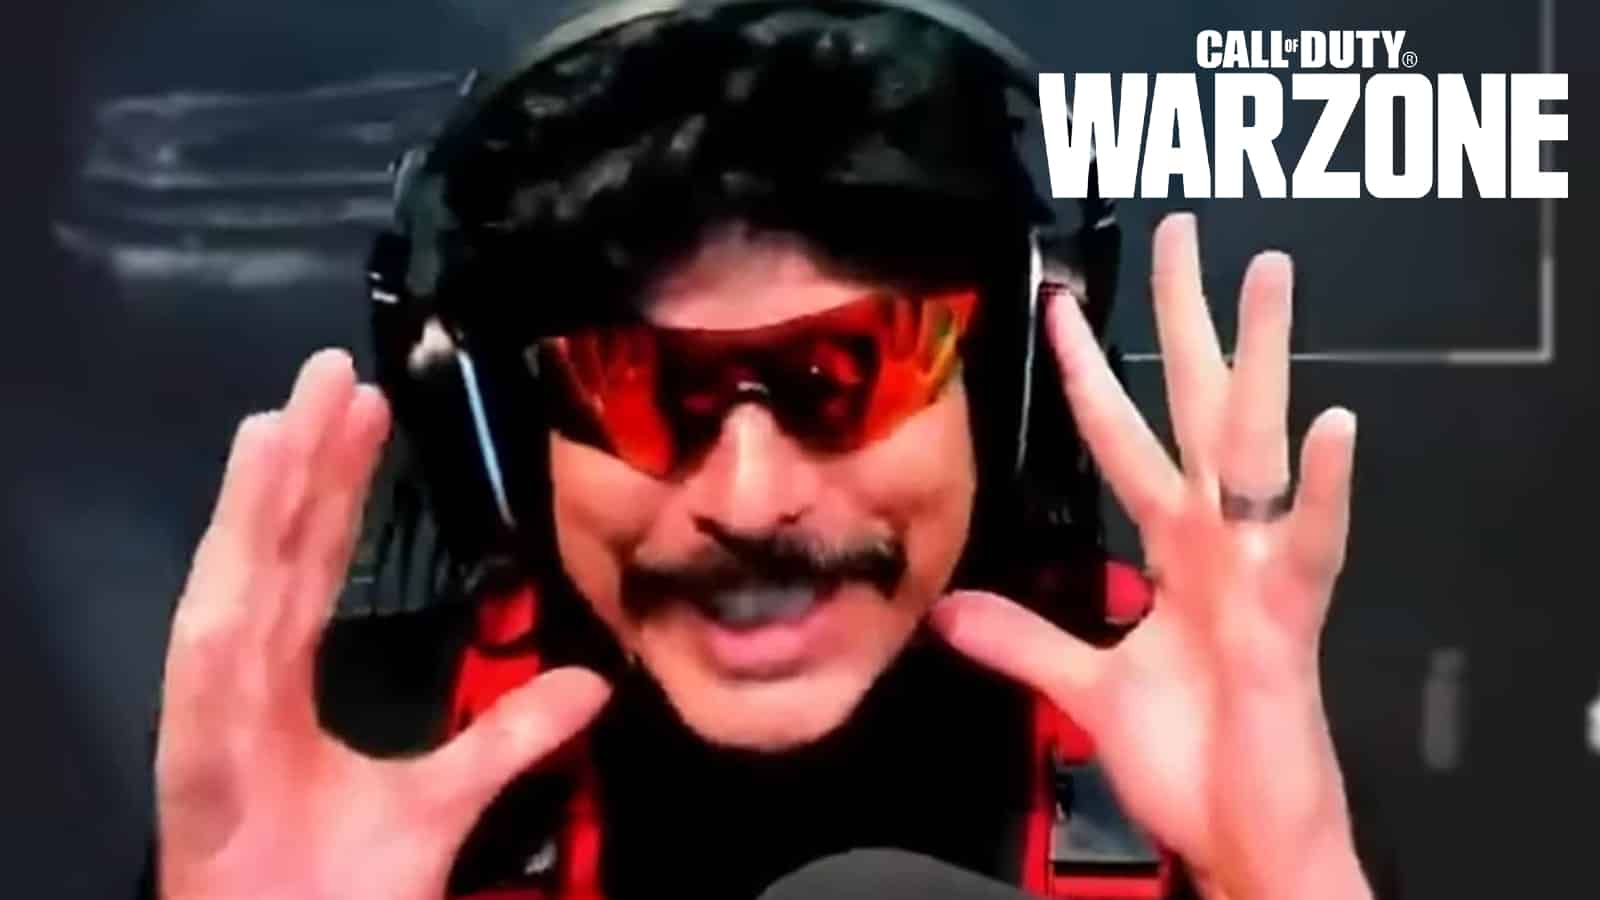 Dr Disrespect uninstalls Warzone yet again after being repeatedly harassed by stream sniper